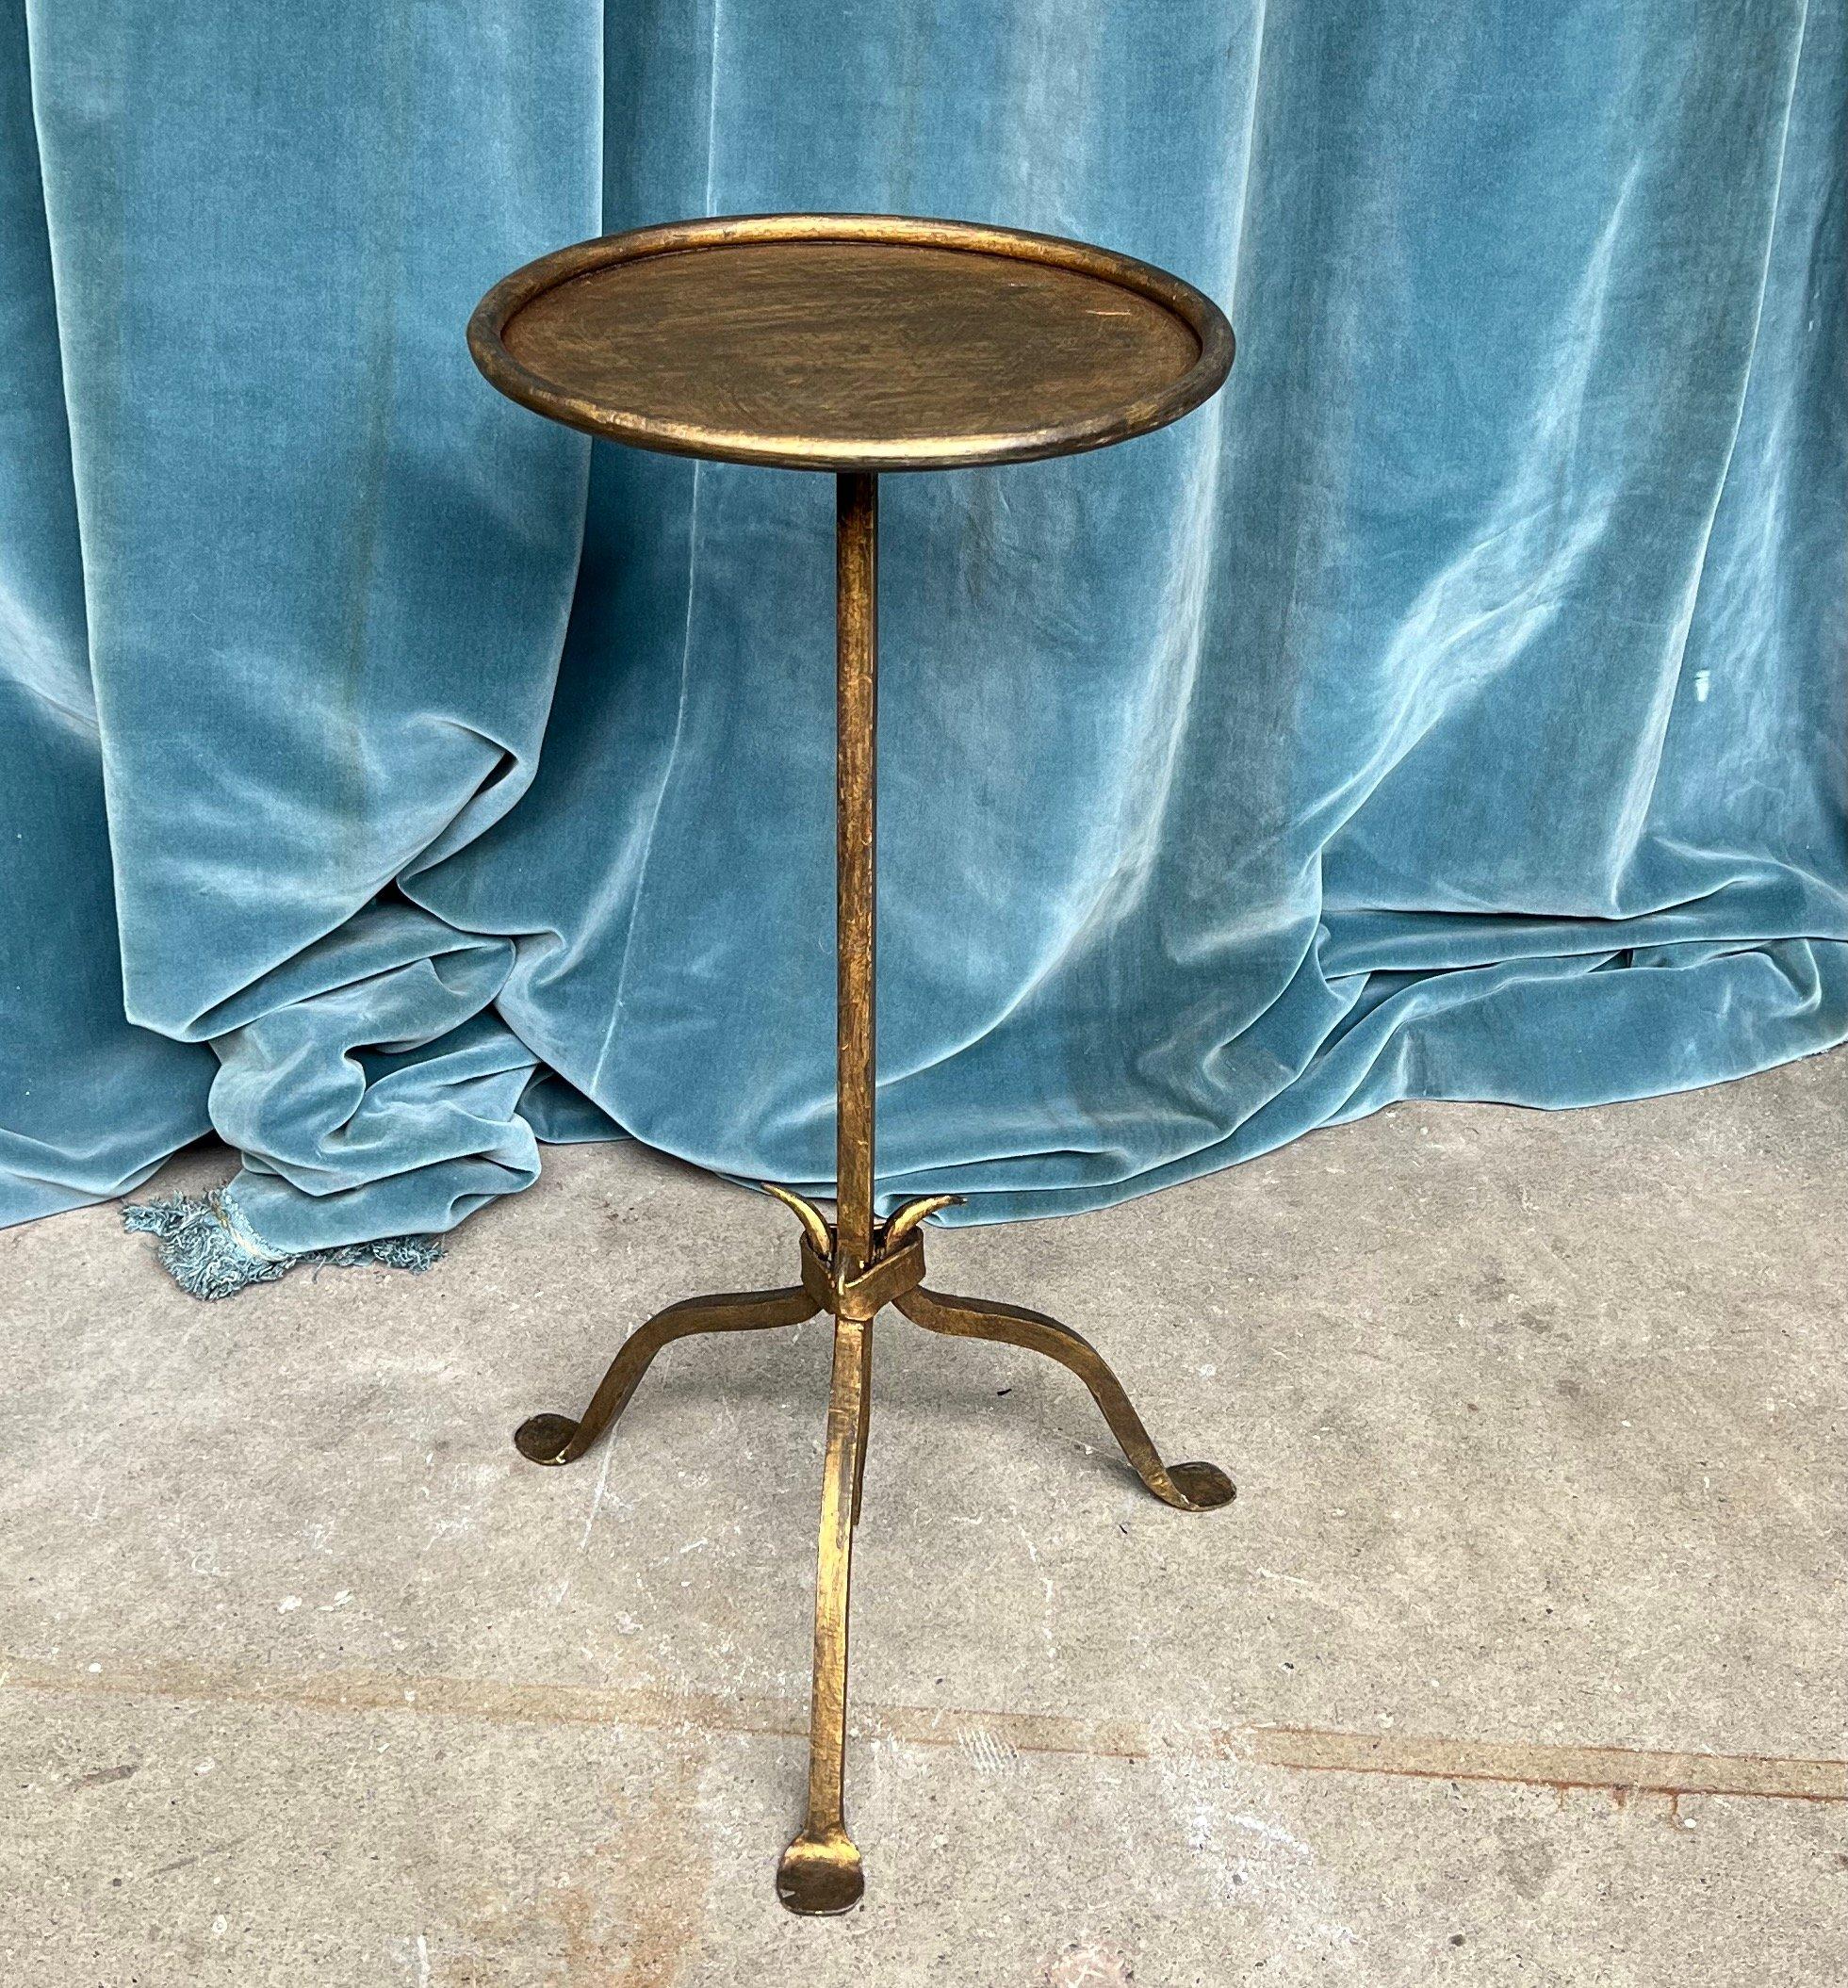 This captivating iron drinks table hails from Spain and dates back to the 1950s. Its design boasts a central stem that narrows gracefully towards an elegant point, seamlessly merging with a tripod base made up of three delicately curved legs. The